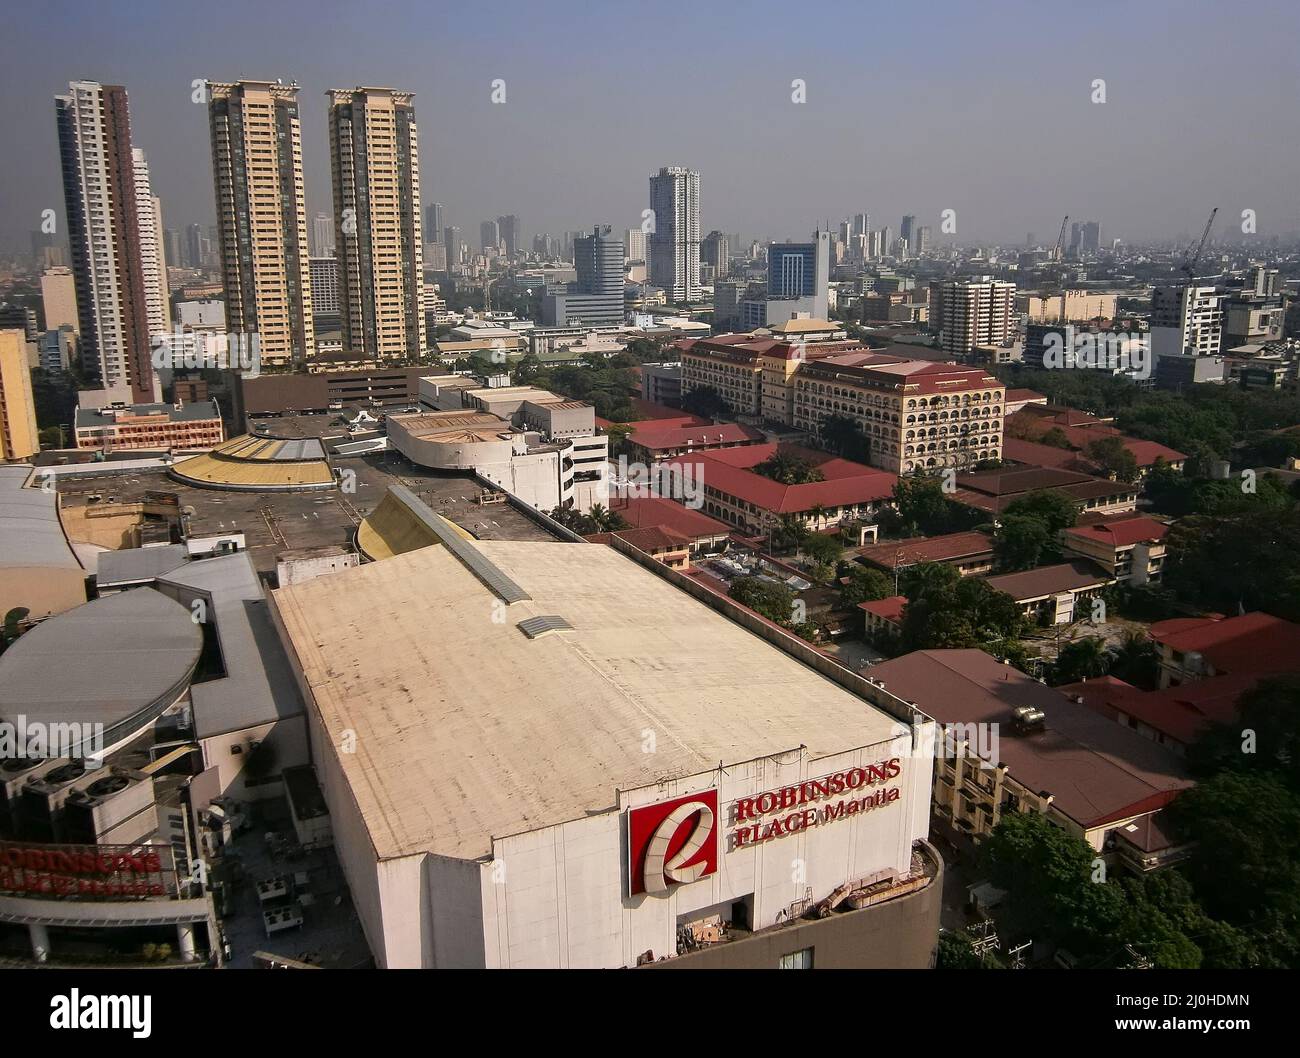 A view of central Manila from a high rise hotel with Robinsons Place mall in foreground. Stock Photo